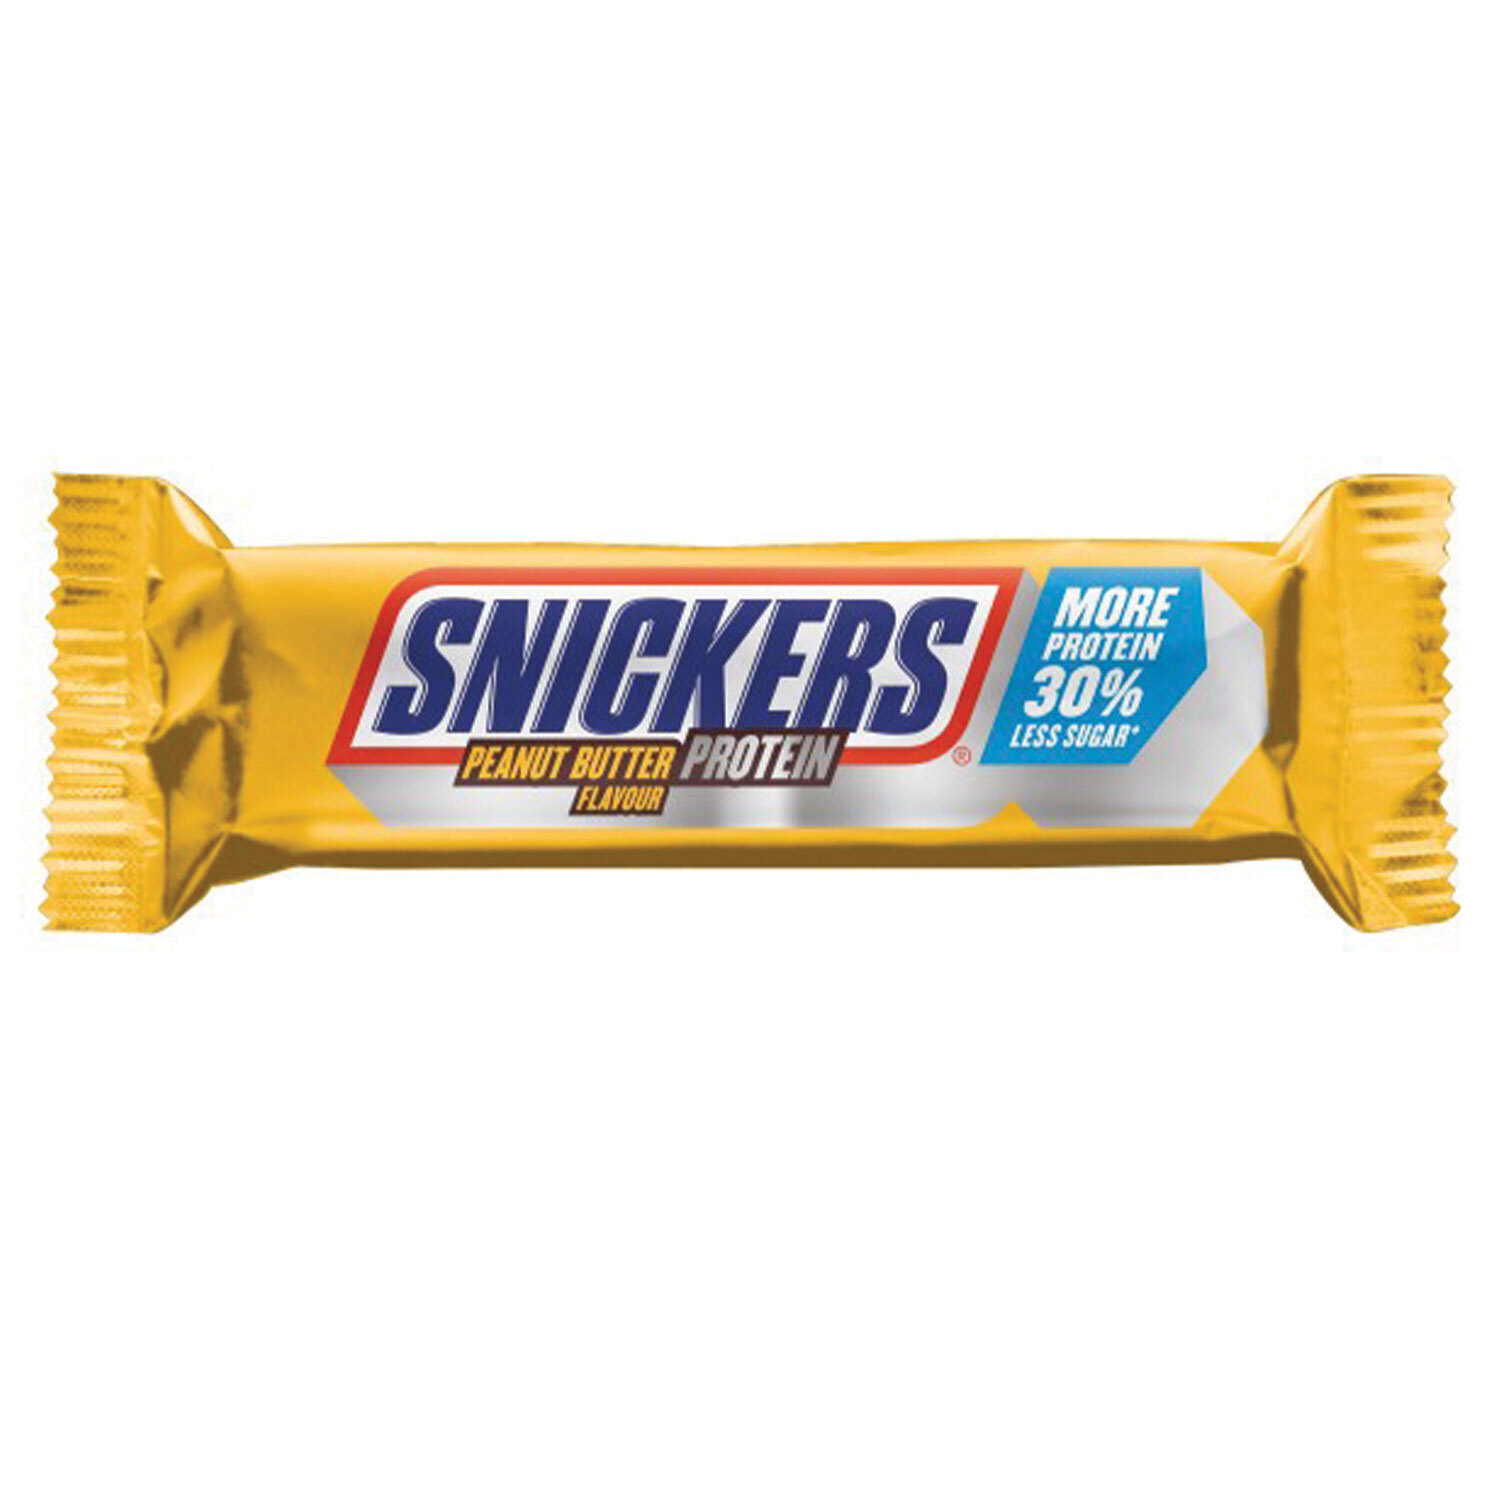 Snickers Peanut Butter Flavour Protein Bar Image